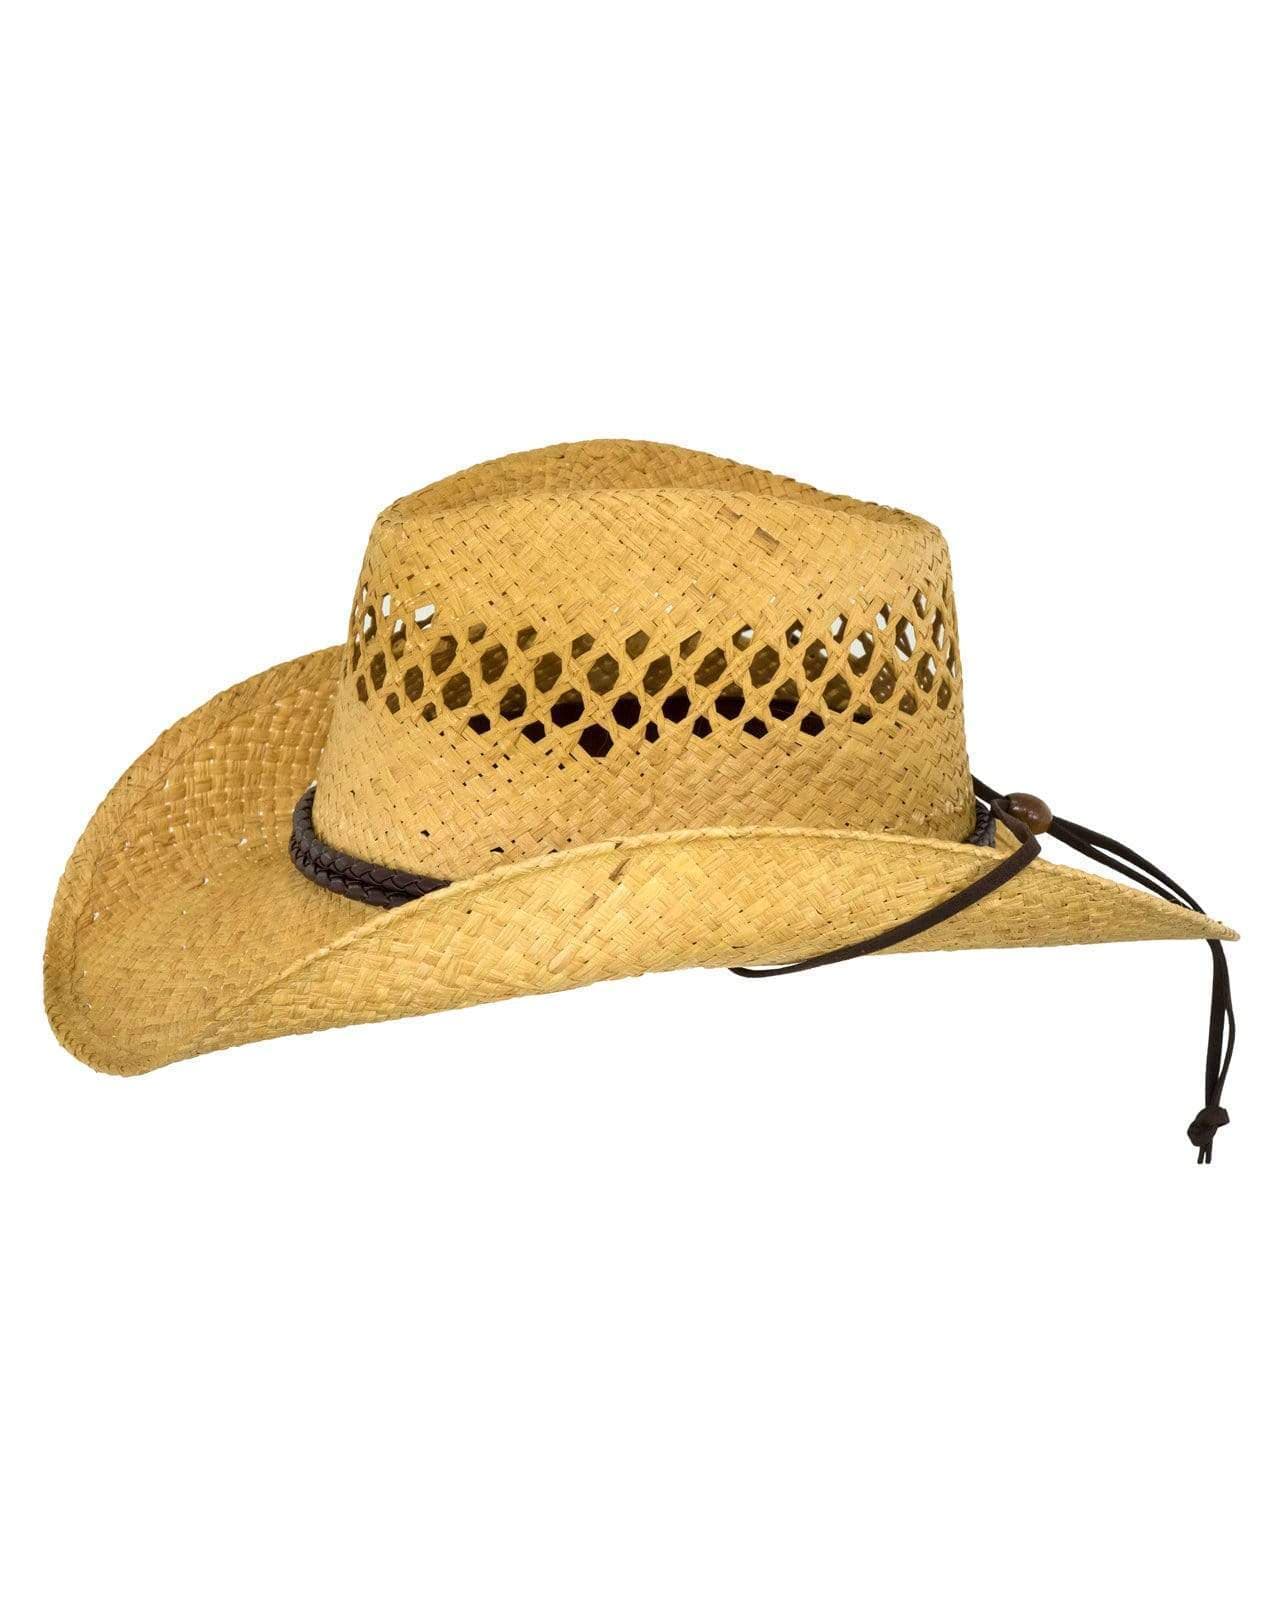 Outback Trading Company Brumby Rider Hats